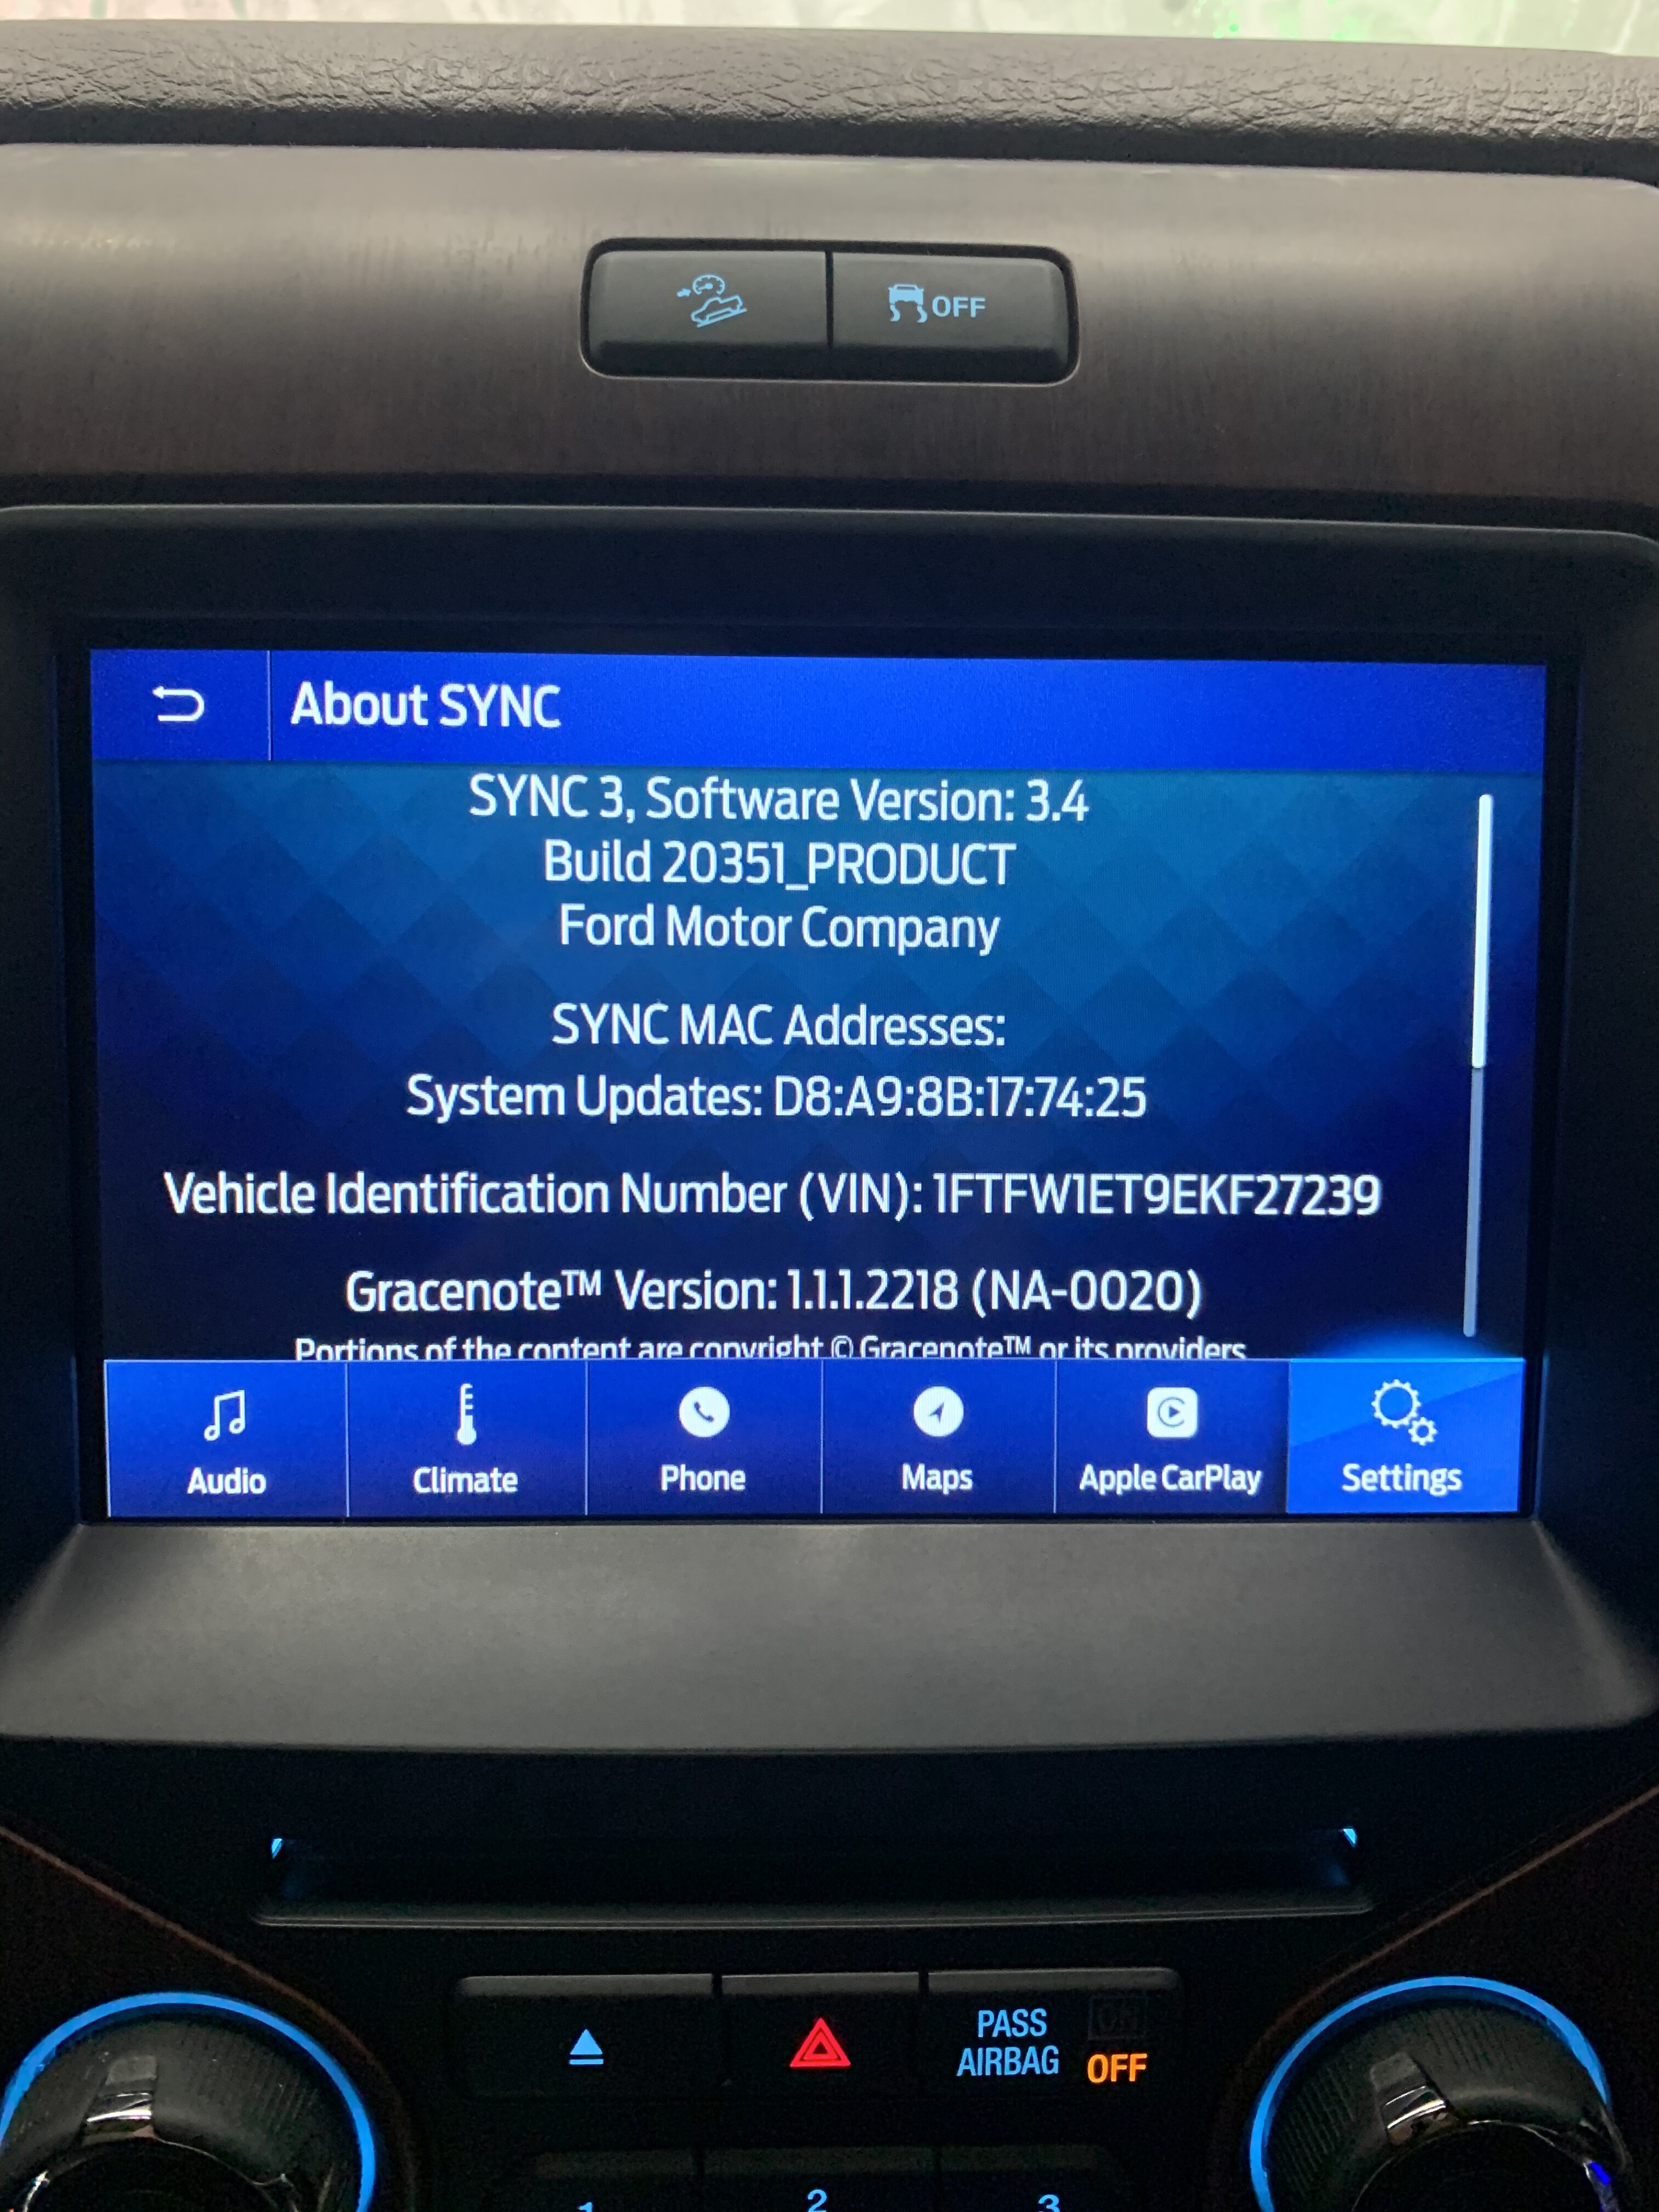 Ford Sync 3 Update SYNC 3.4 latest update won't load maps - SYNC 3 Support - CyanLabs Official  Community